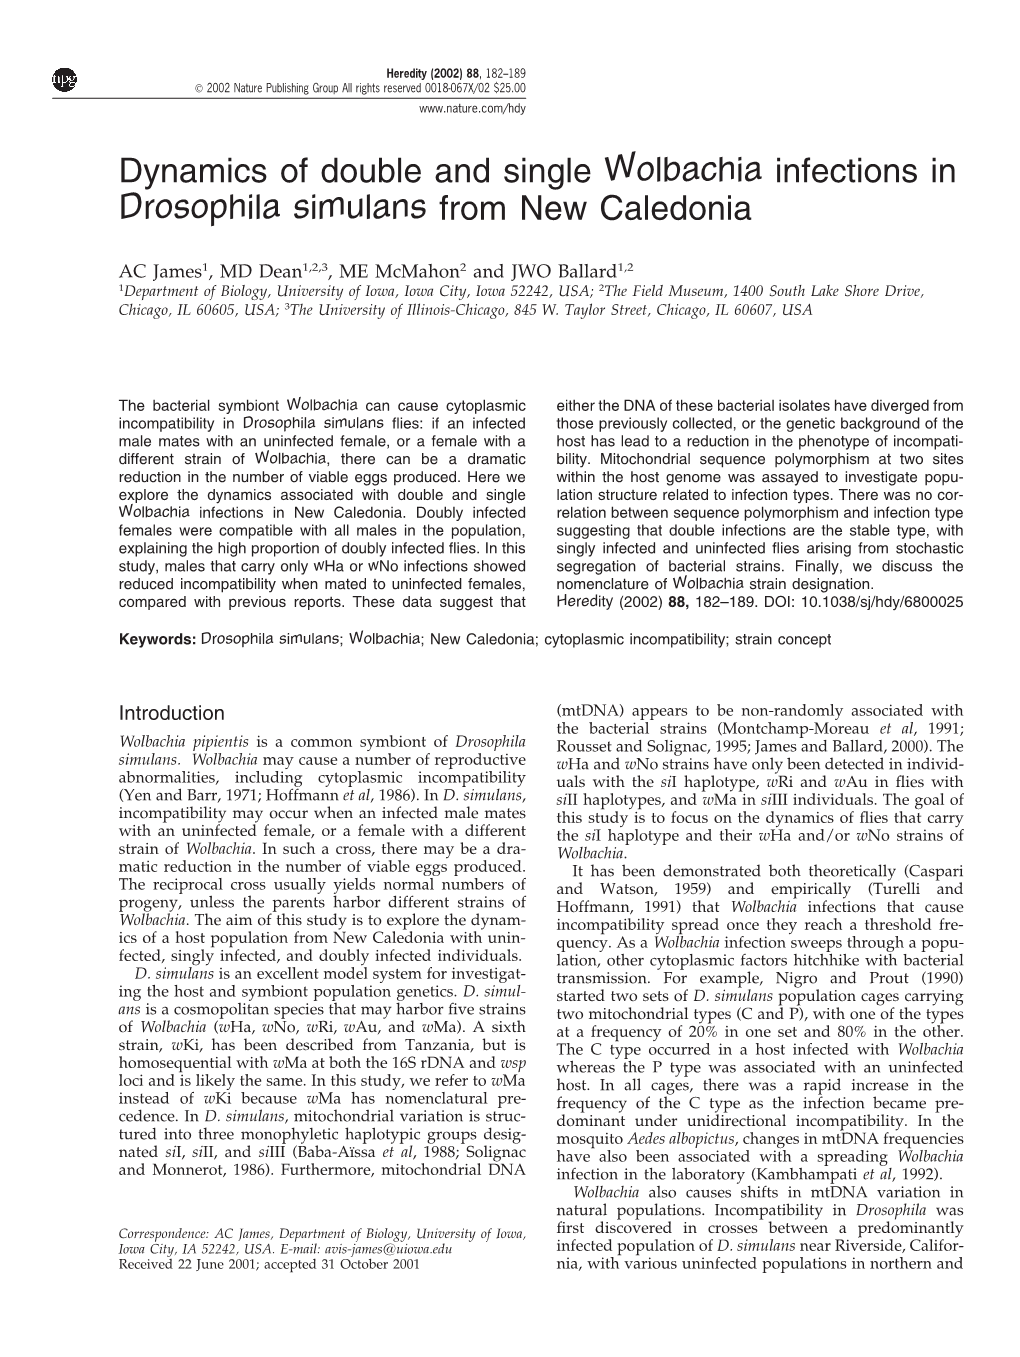 Dynamics of Double and Single Wolbachia Infections in Drosophila Simulans from New Caledonia